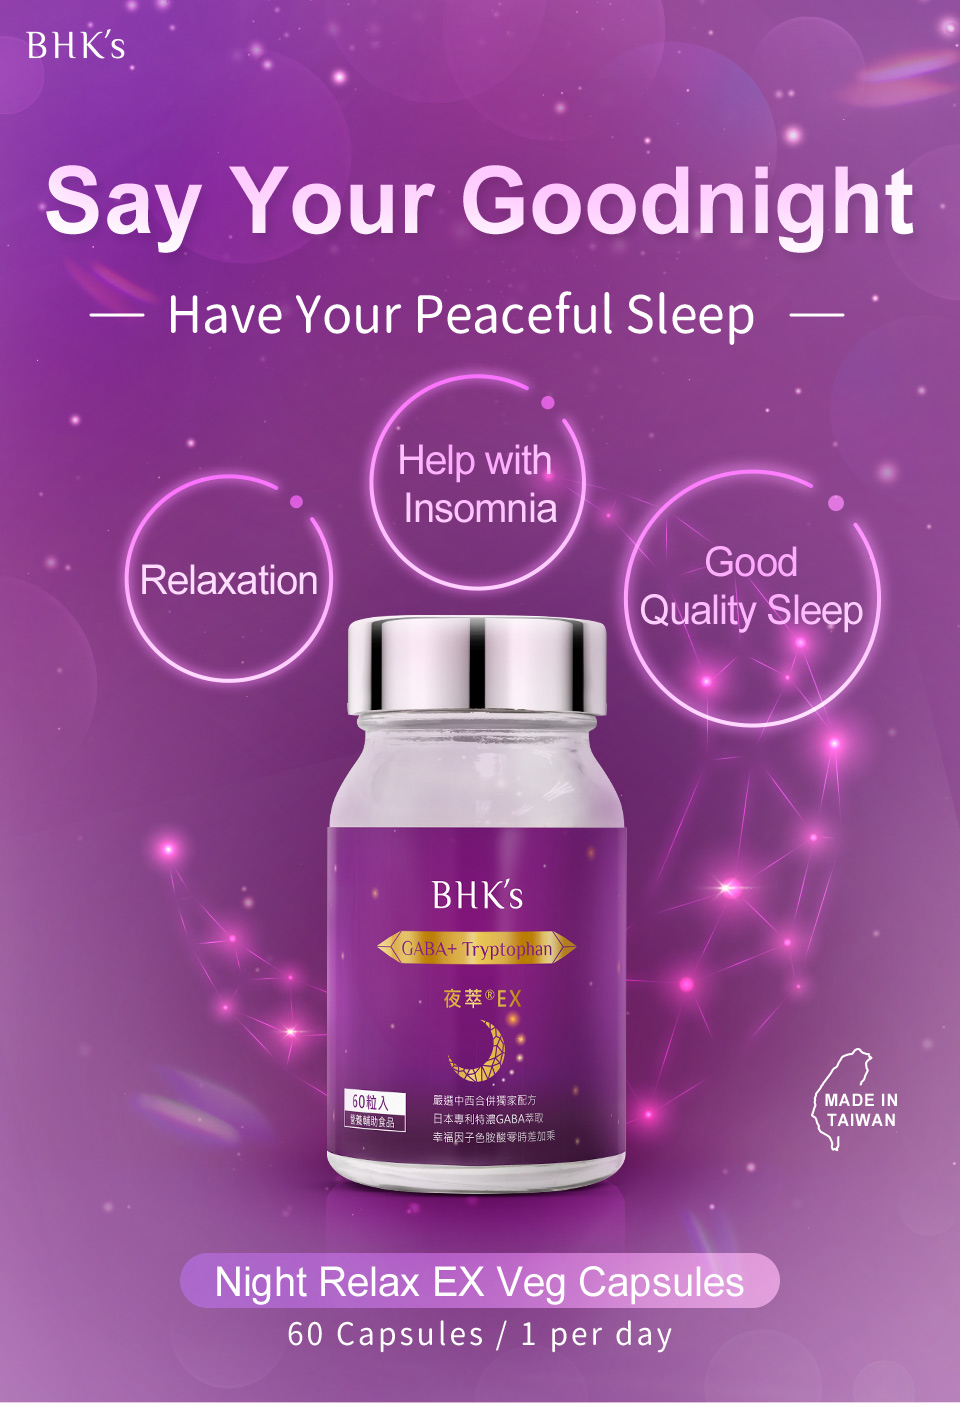 Take BHK's Night Time for more restful sleep.